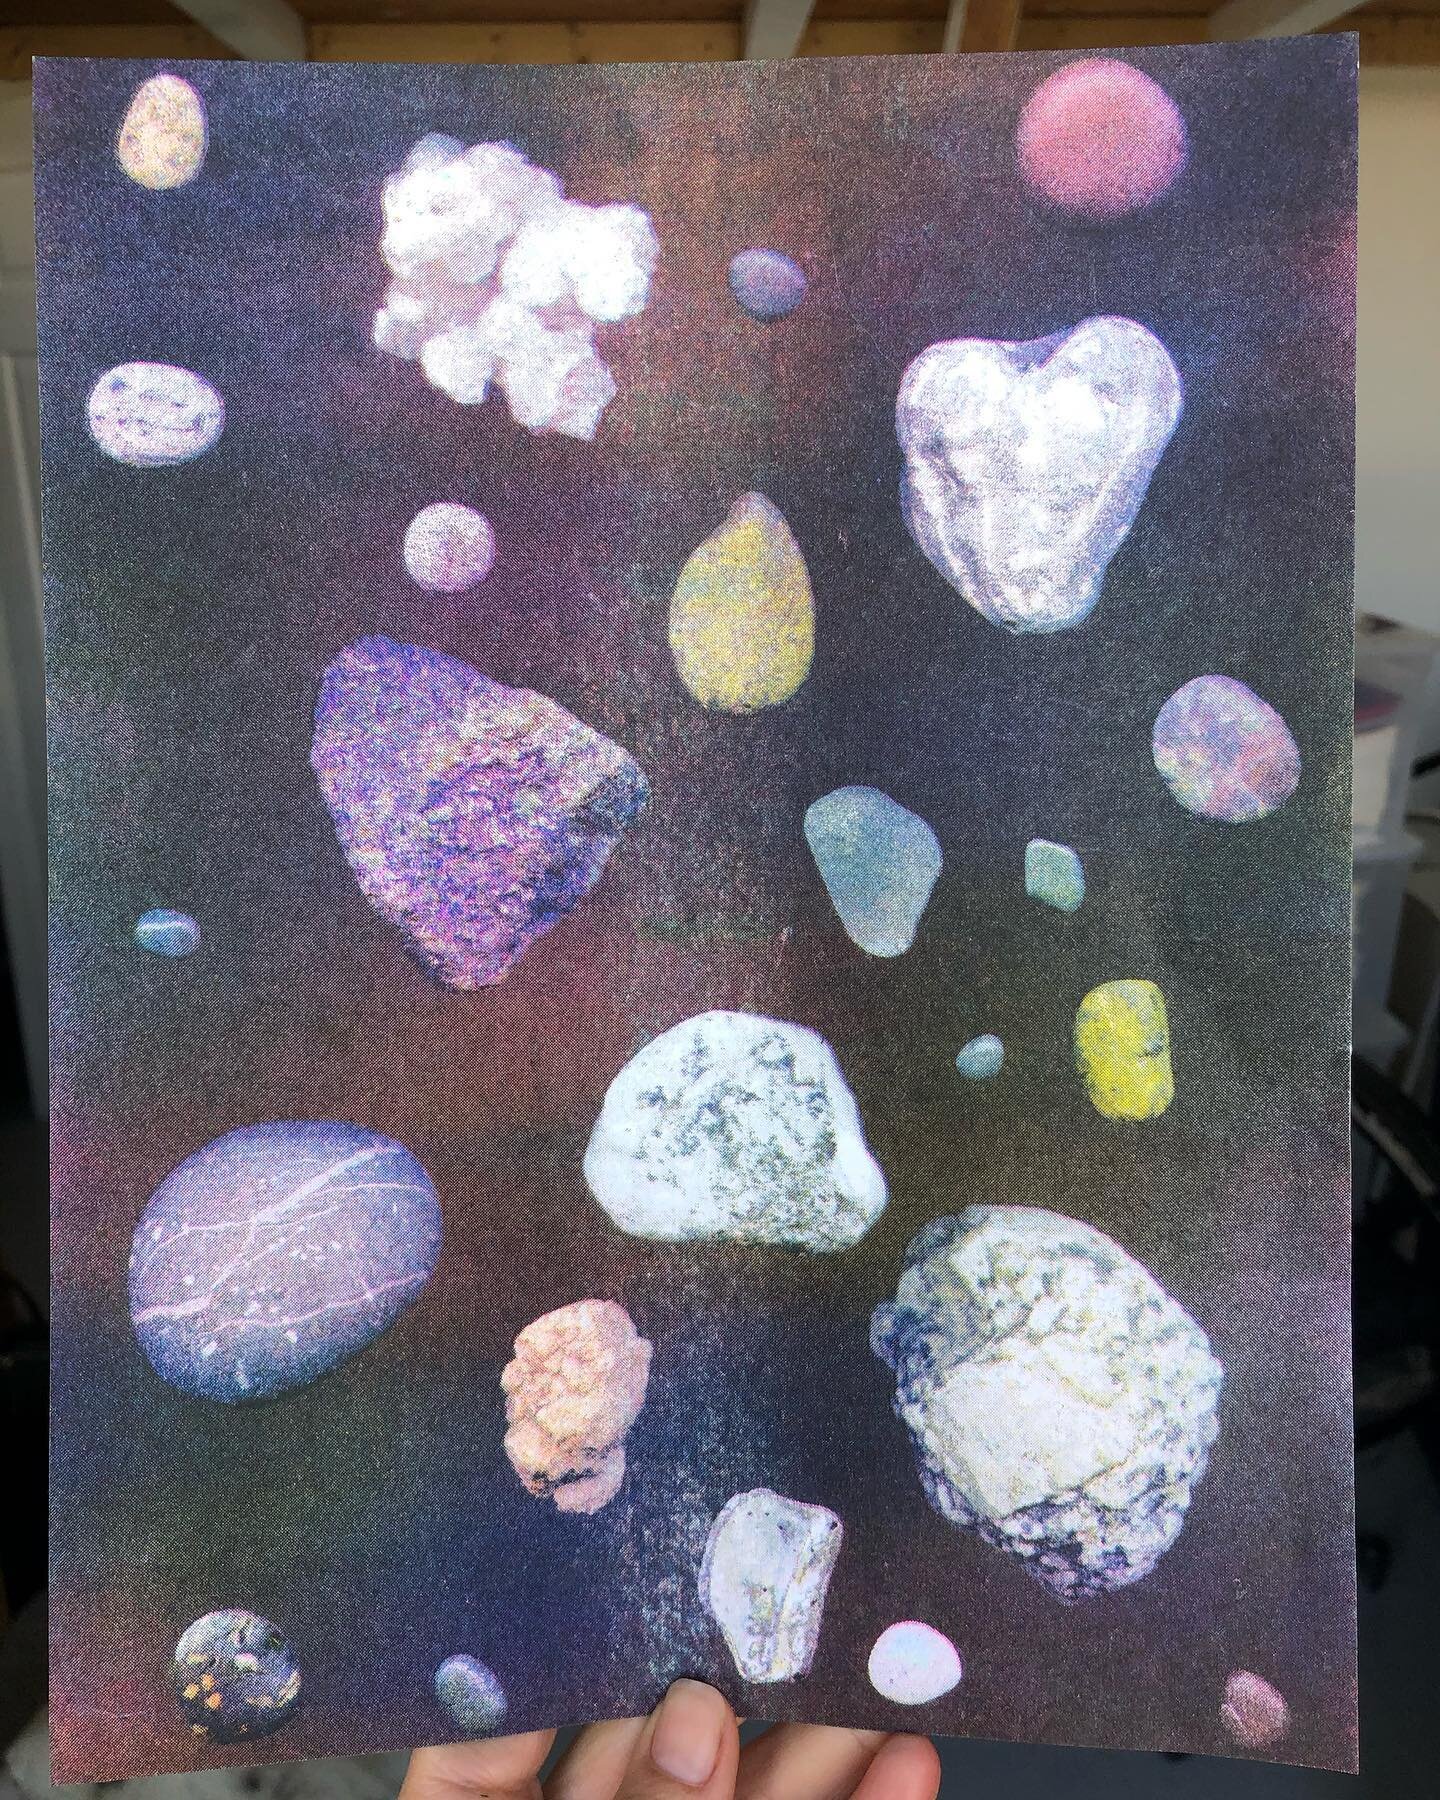 A universe of meaningful pebbles printed for @albaglia